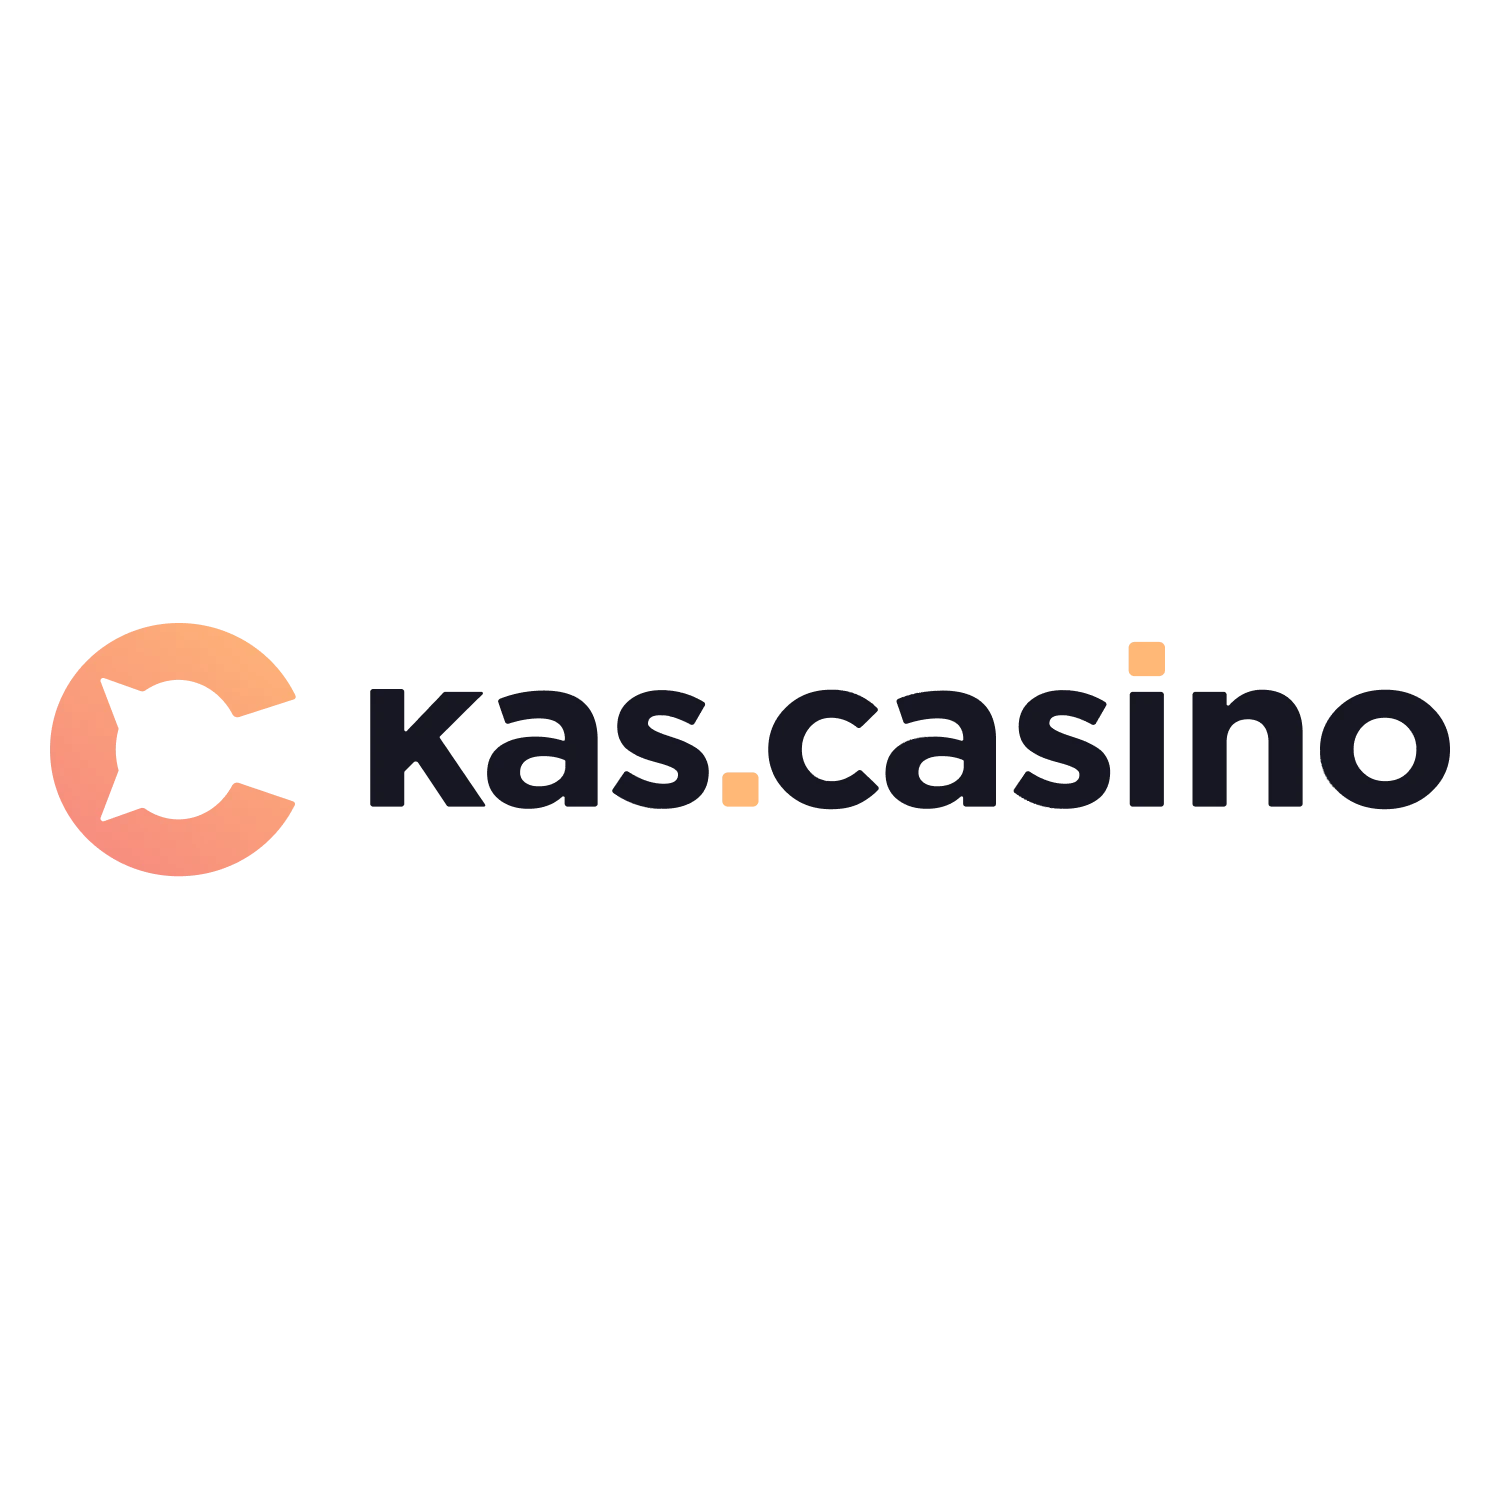 Kas Casino has a convenient website and a large casino games section.